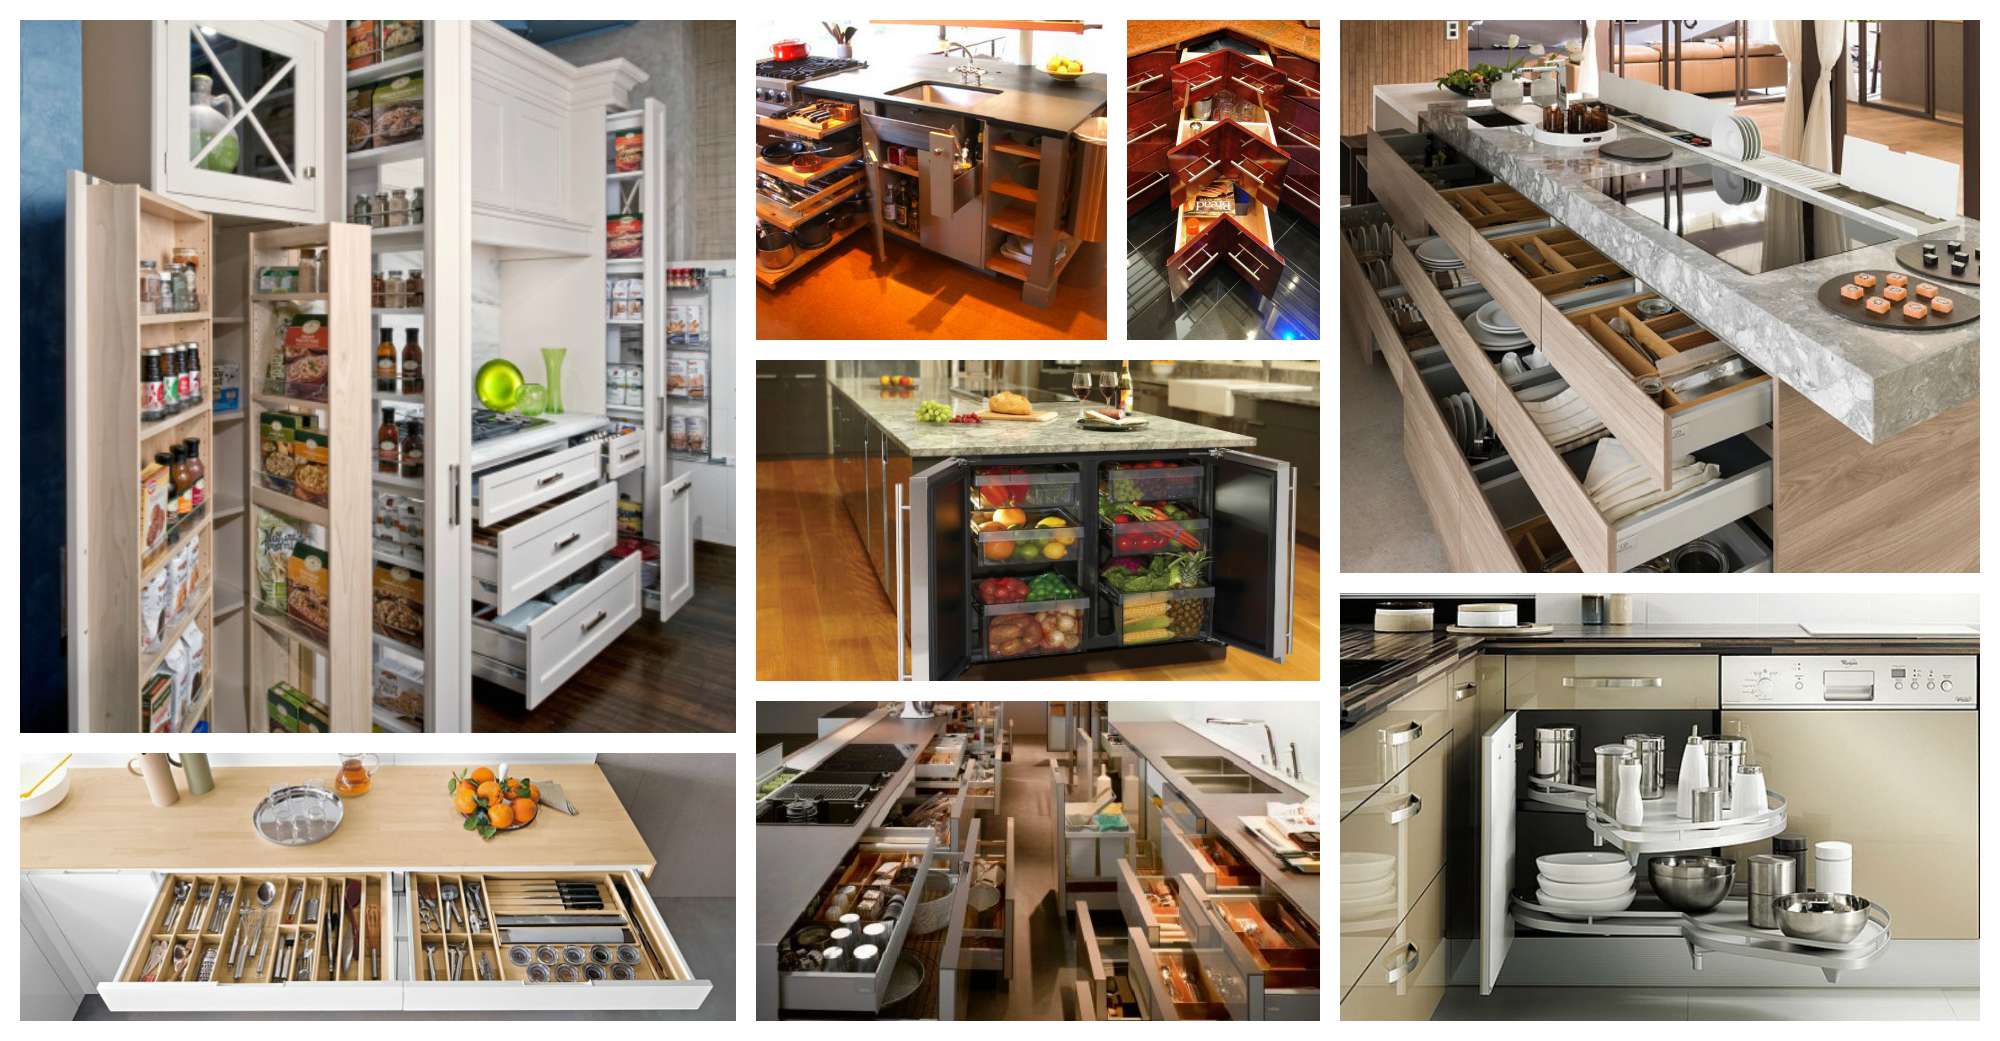 20 Super Smart Kitchen Storage Ideas That Will Make Your Life Easily & Your Kitchen Look Gorgeous!